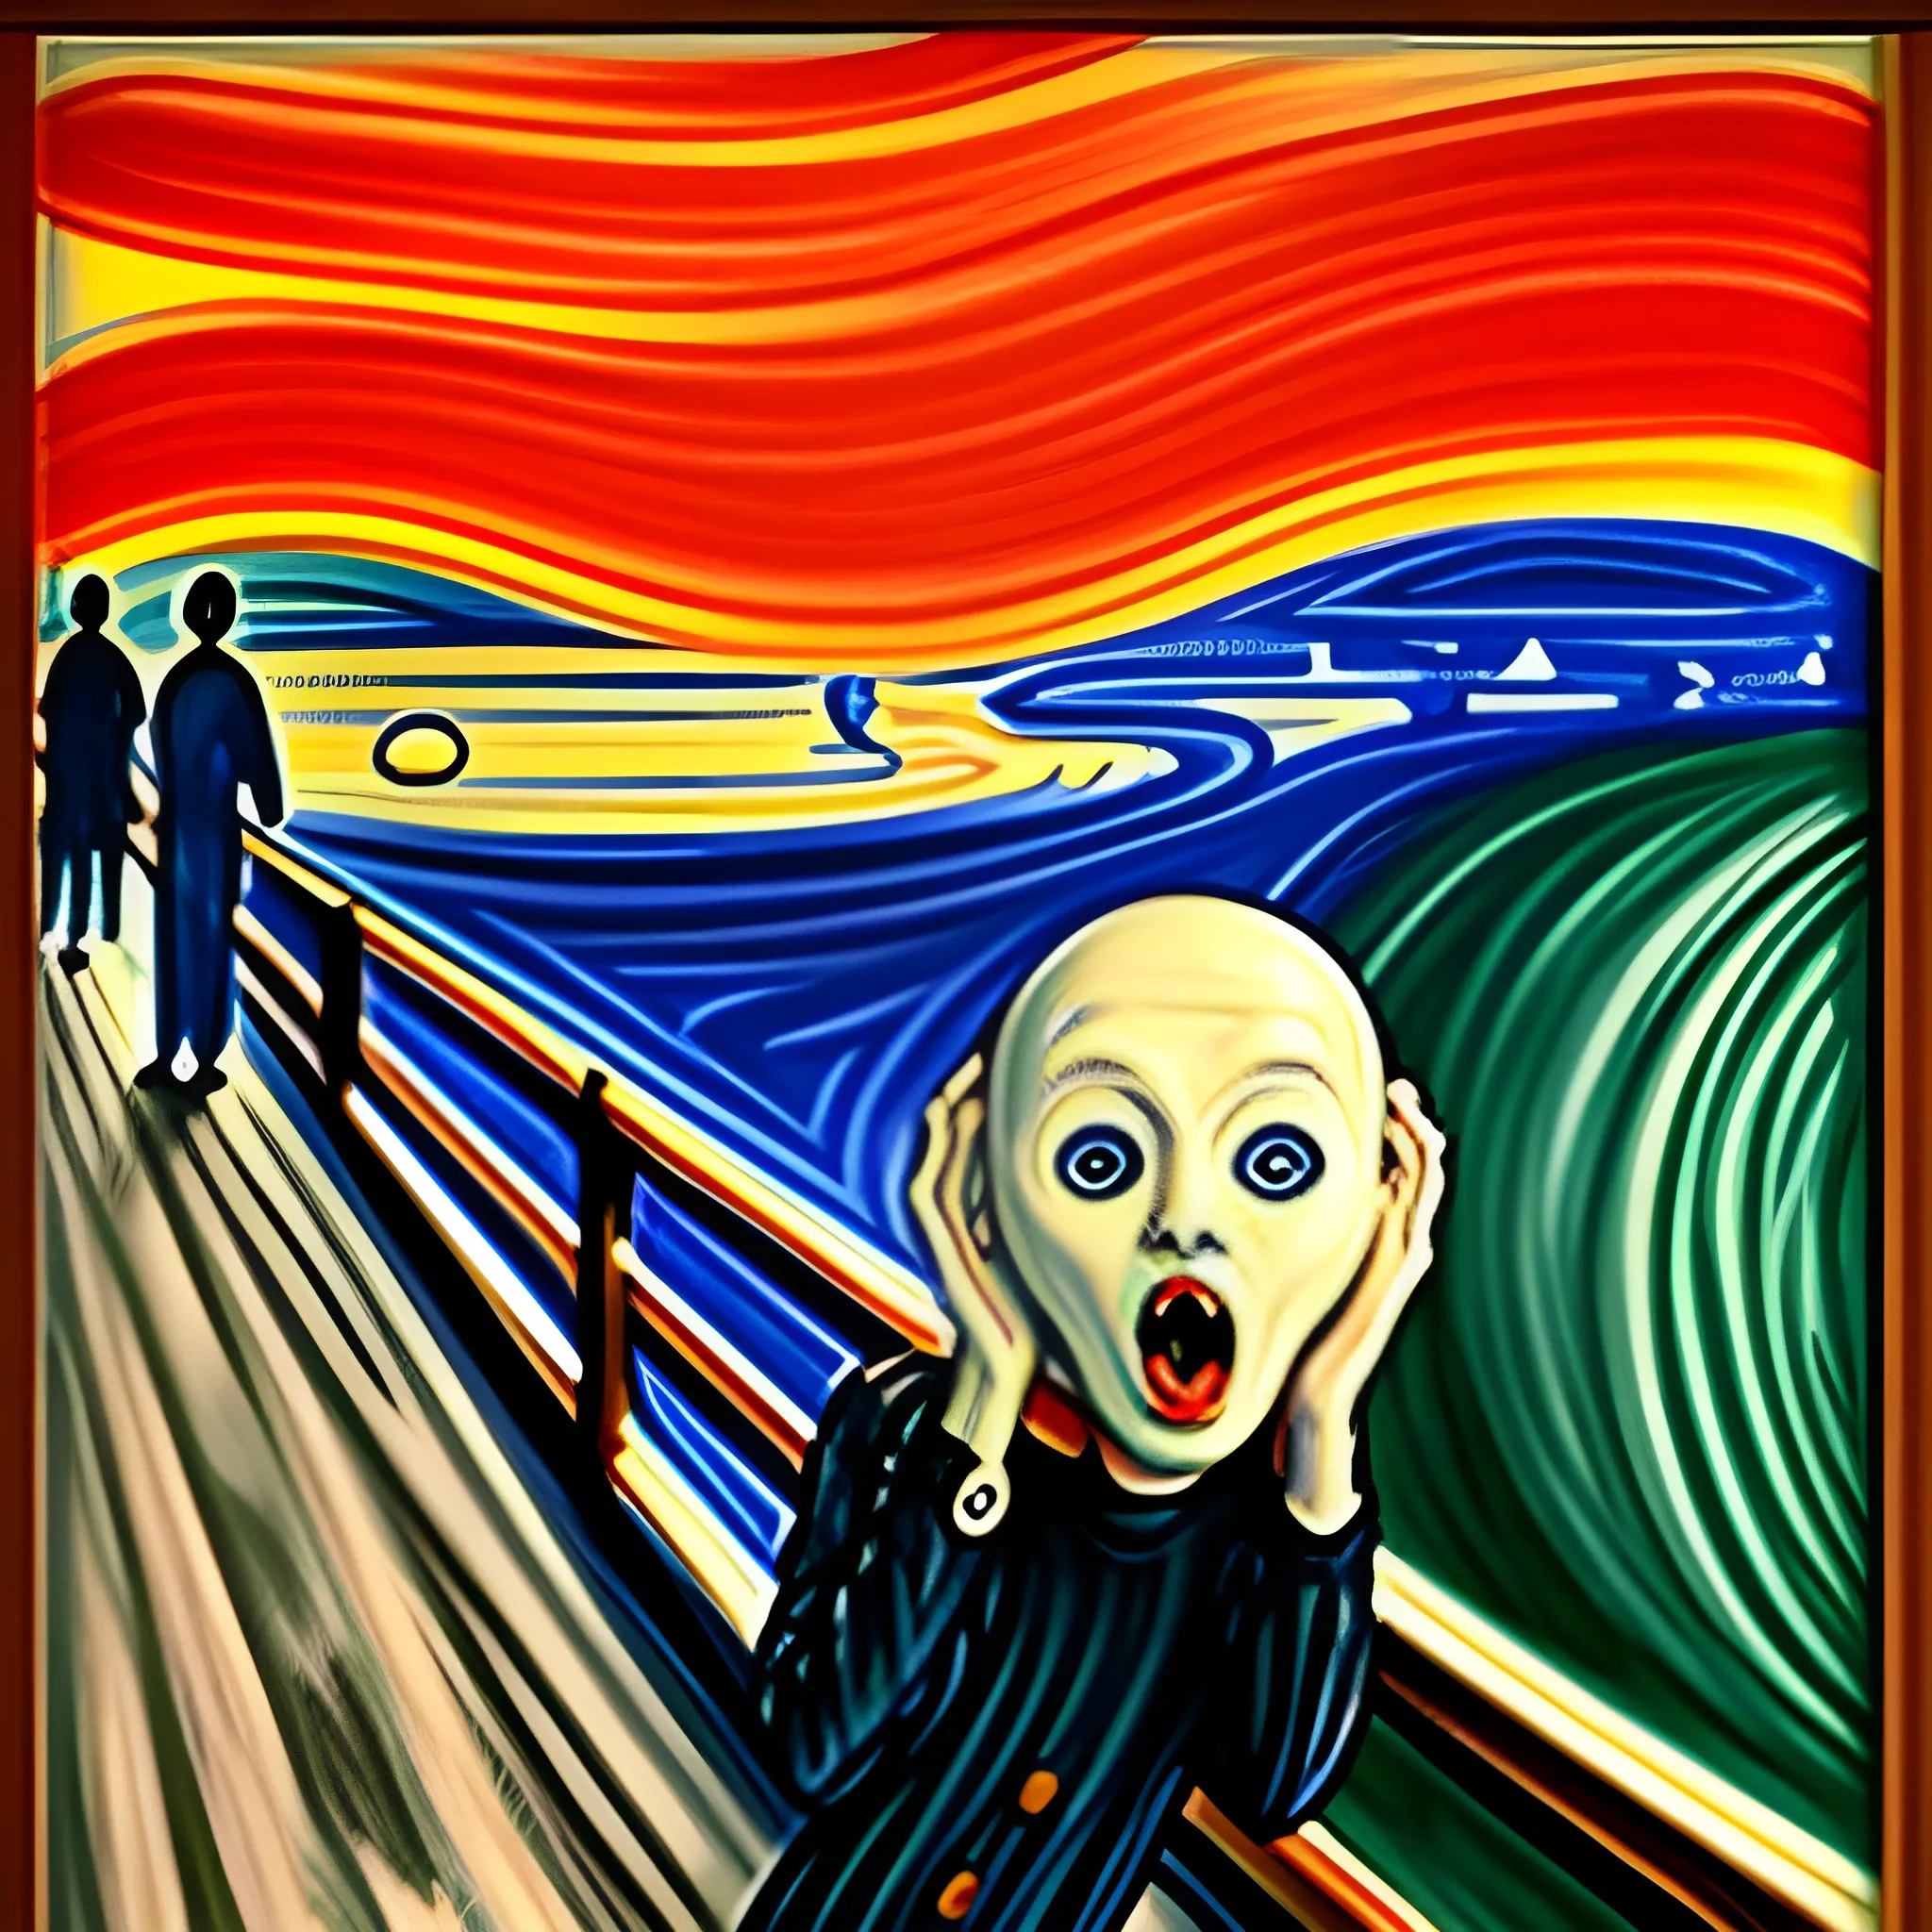 The Scream , in real life